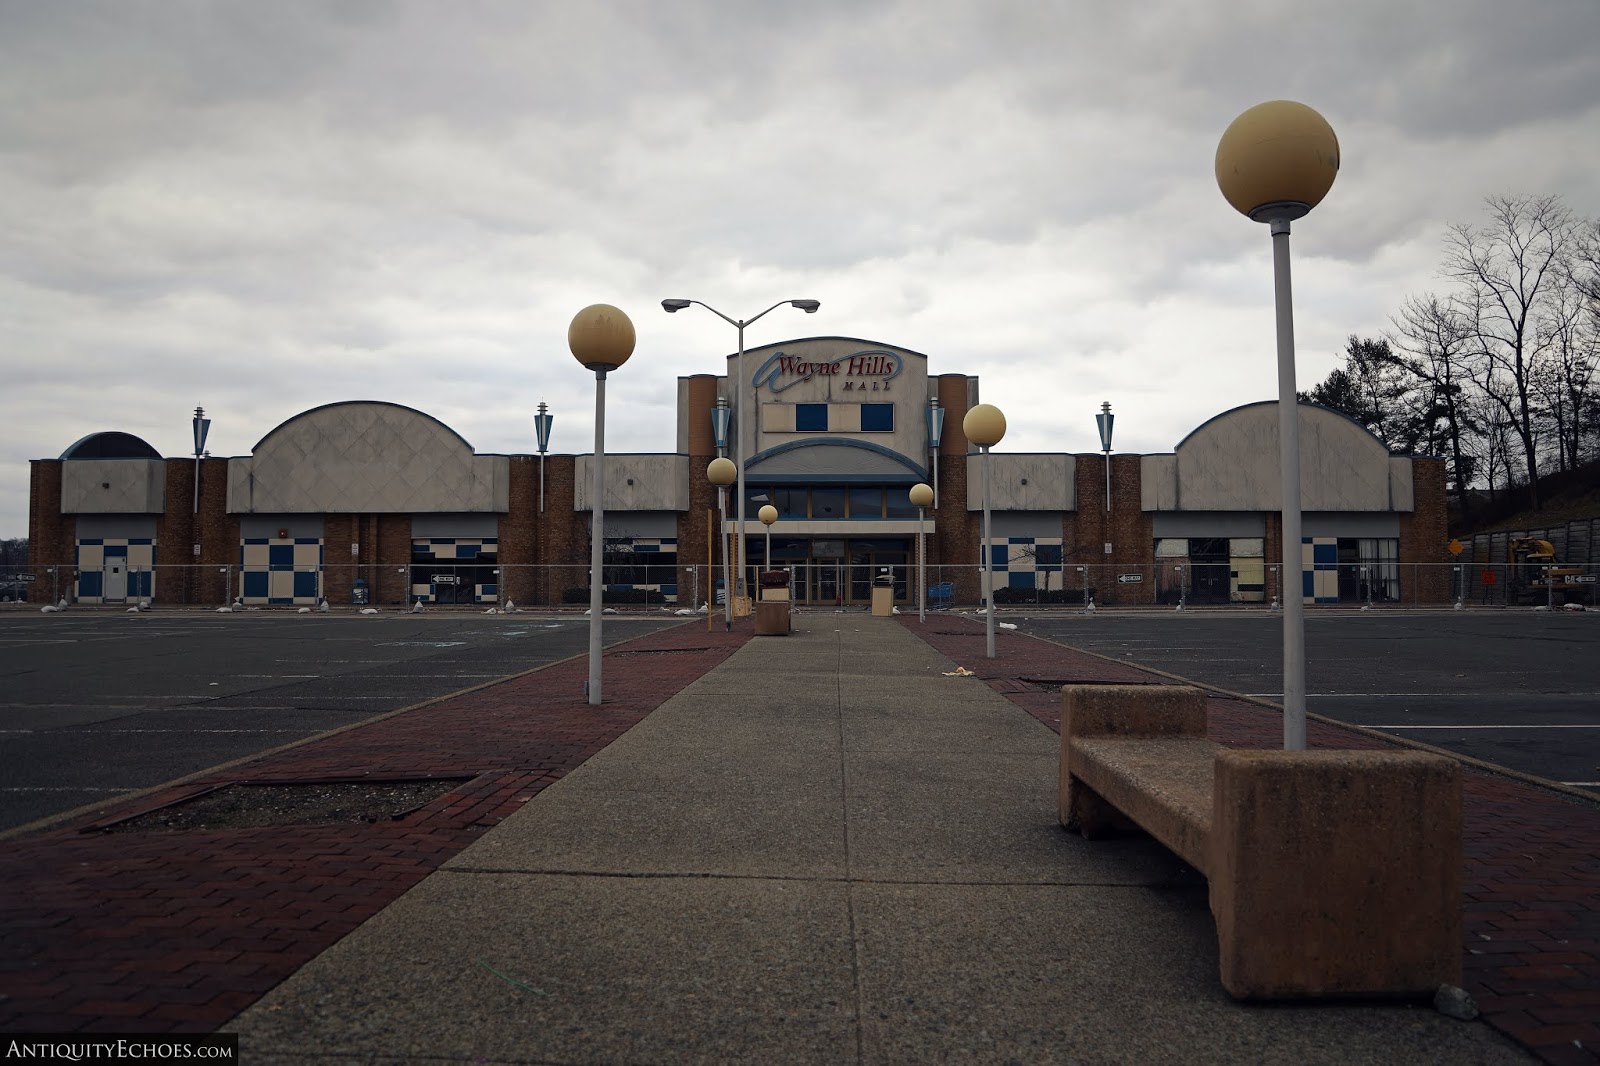 Antiquity Echoes: The Wayne Hills Mall